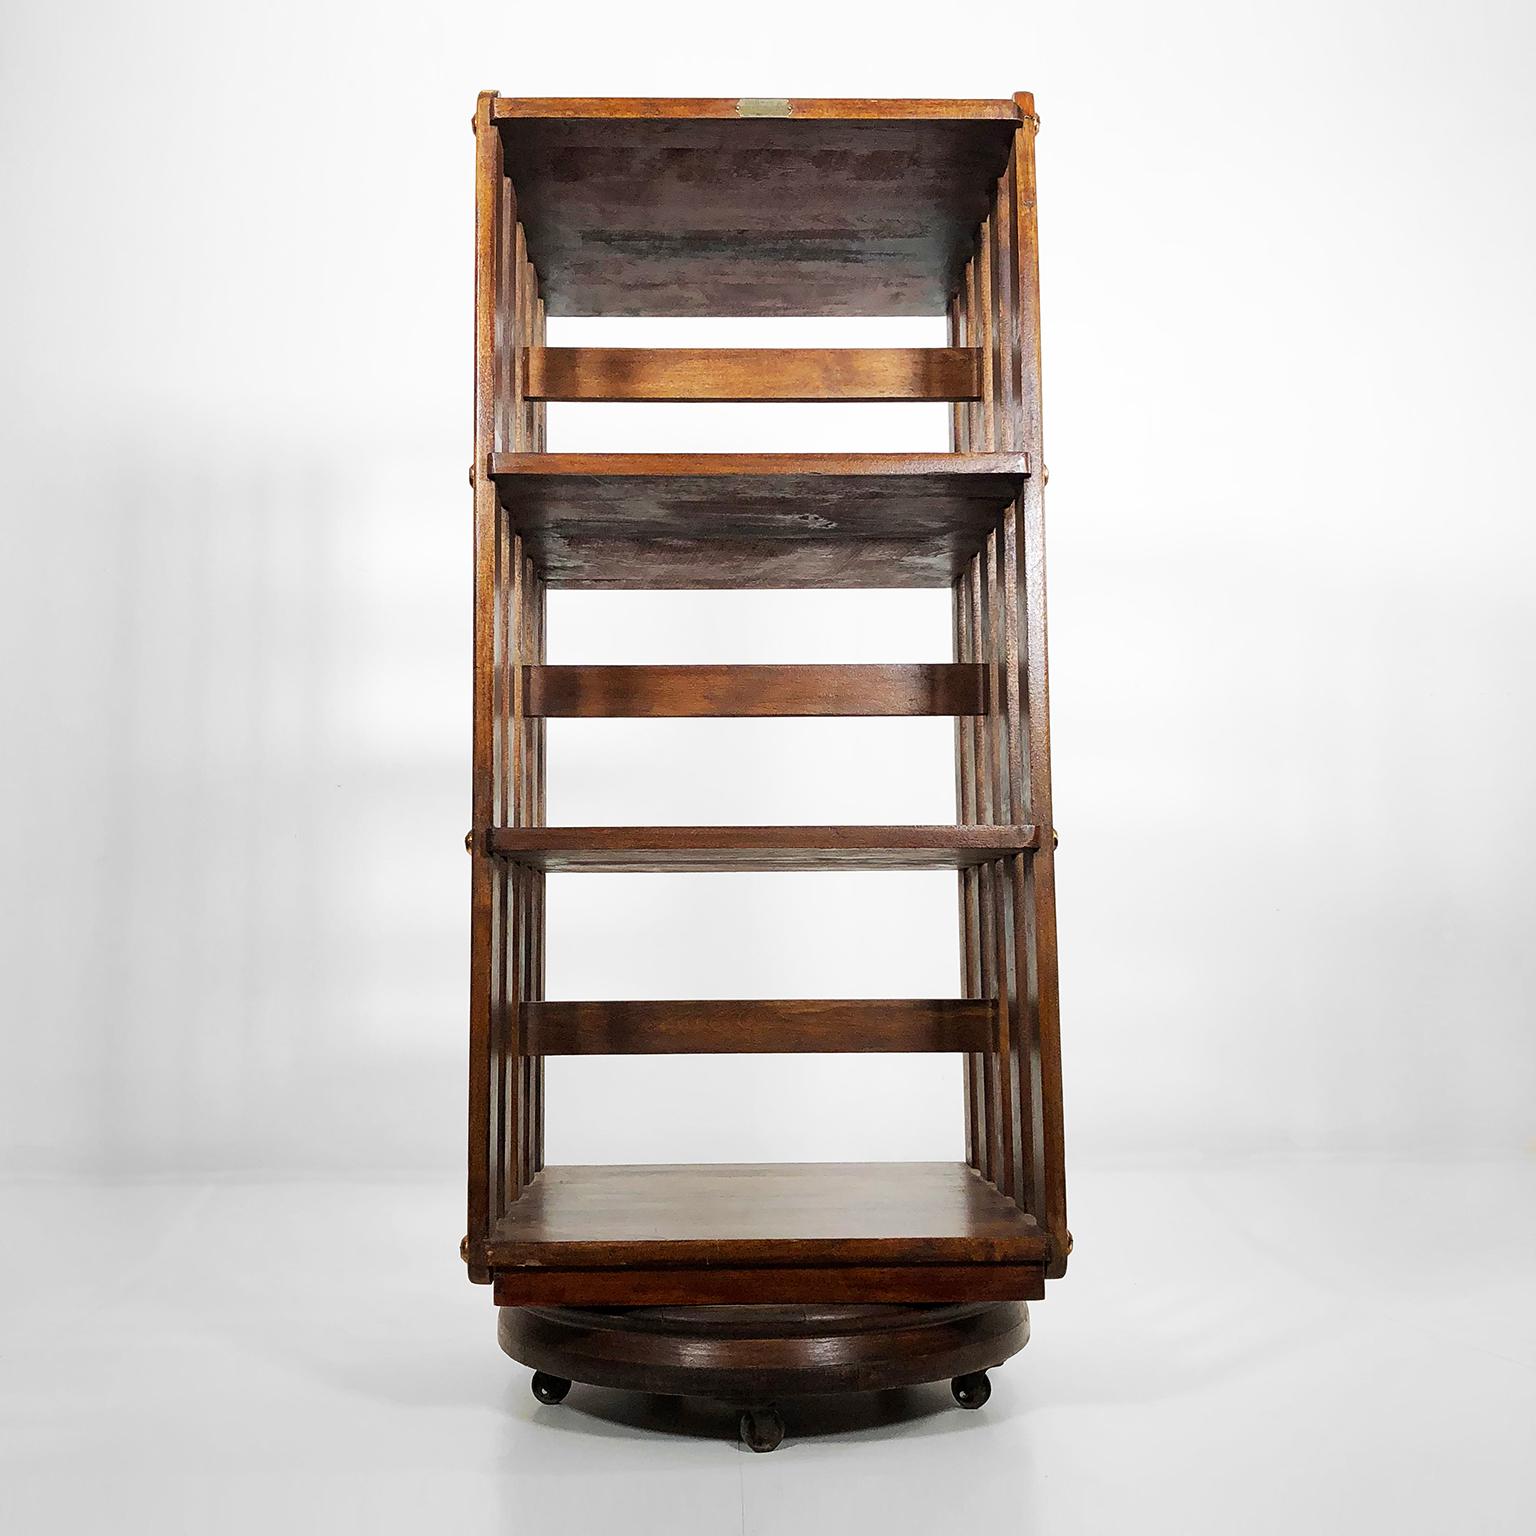 Amazing revolving bookcase by Sargent MFG Co. Muskegon, Mich. revolving system patented in 1880, circa 1900.